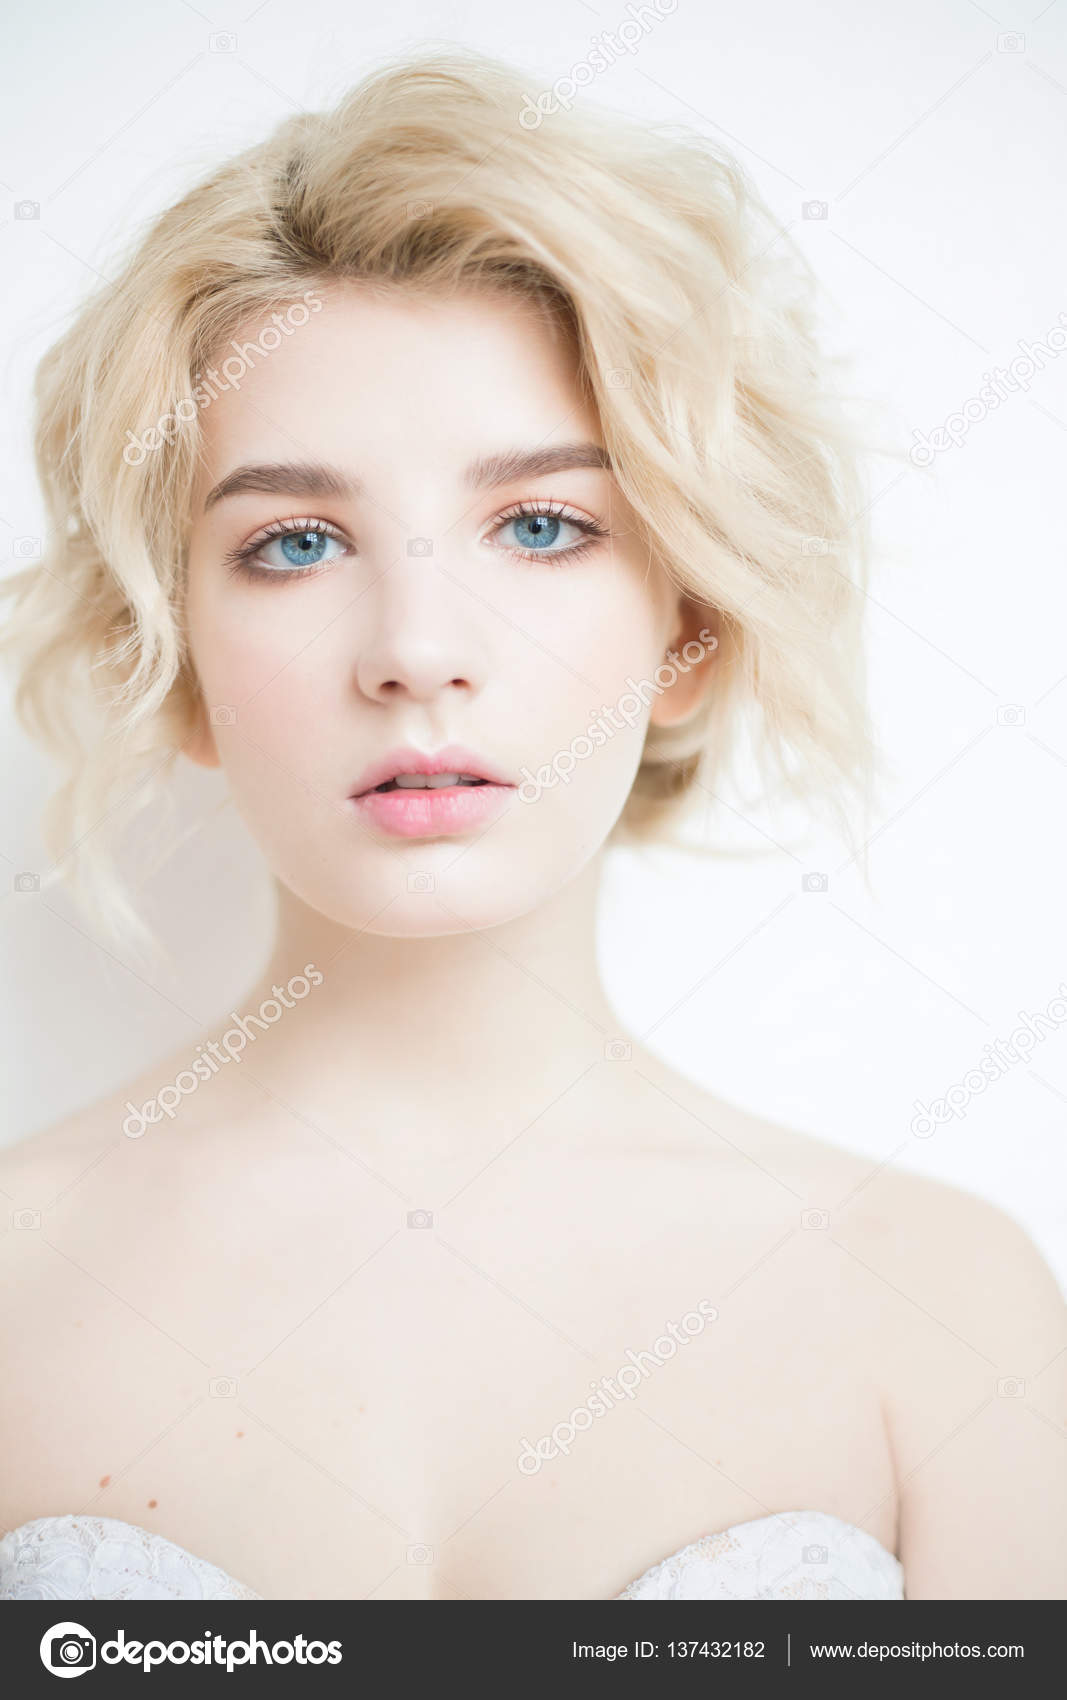 Woman With White Hair In A Wedding Dress Young Blonde Woman With